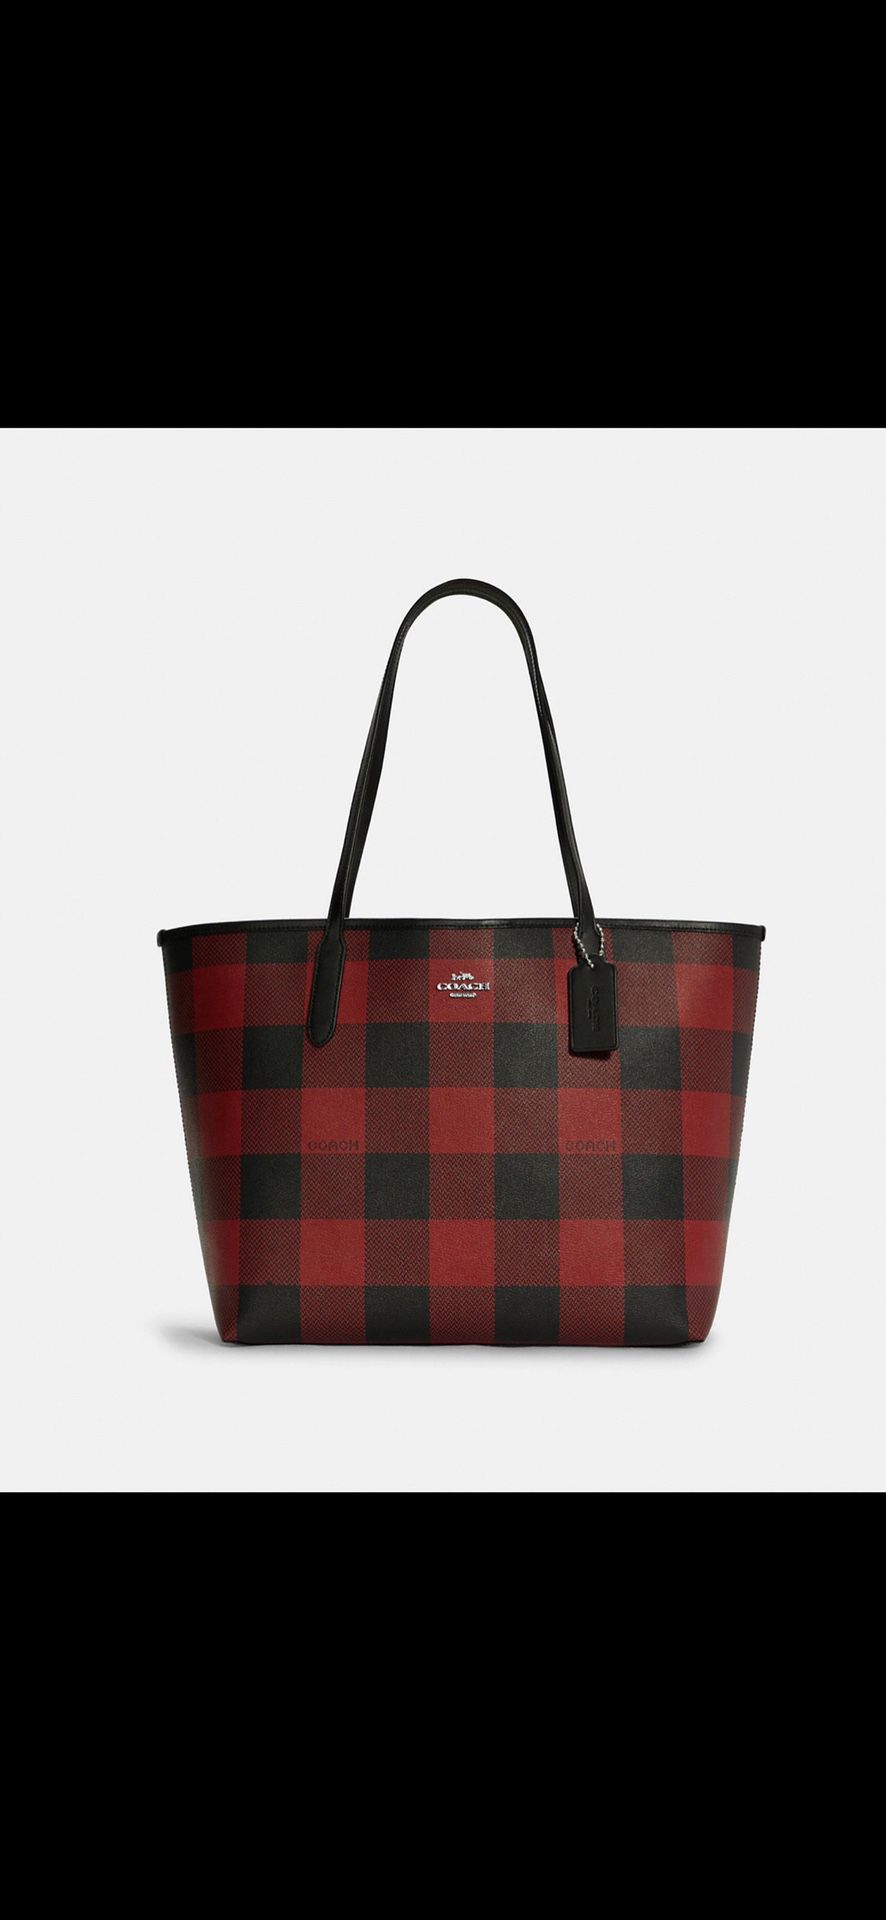 NWT COACH CITY TOTE WITH BUFFALO PLAID PRINT IN BLACK 1941 RED MULTI BAG C7271 